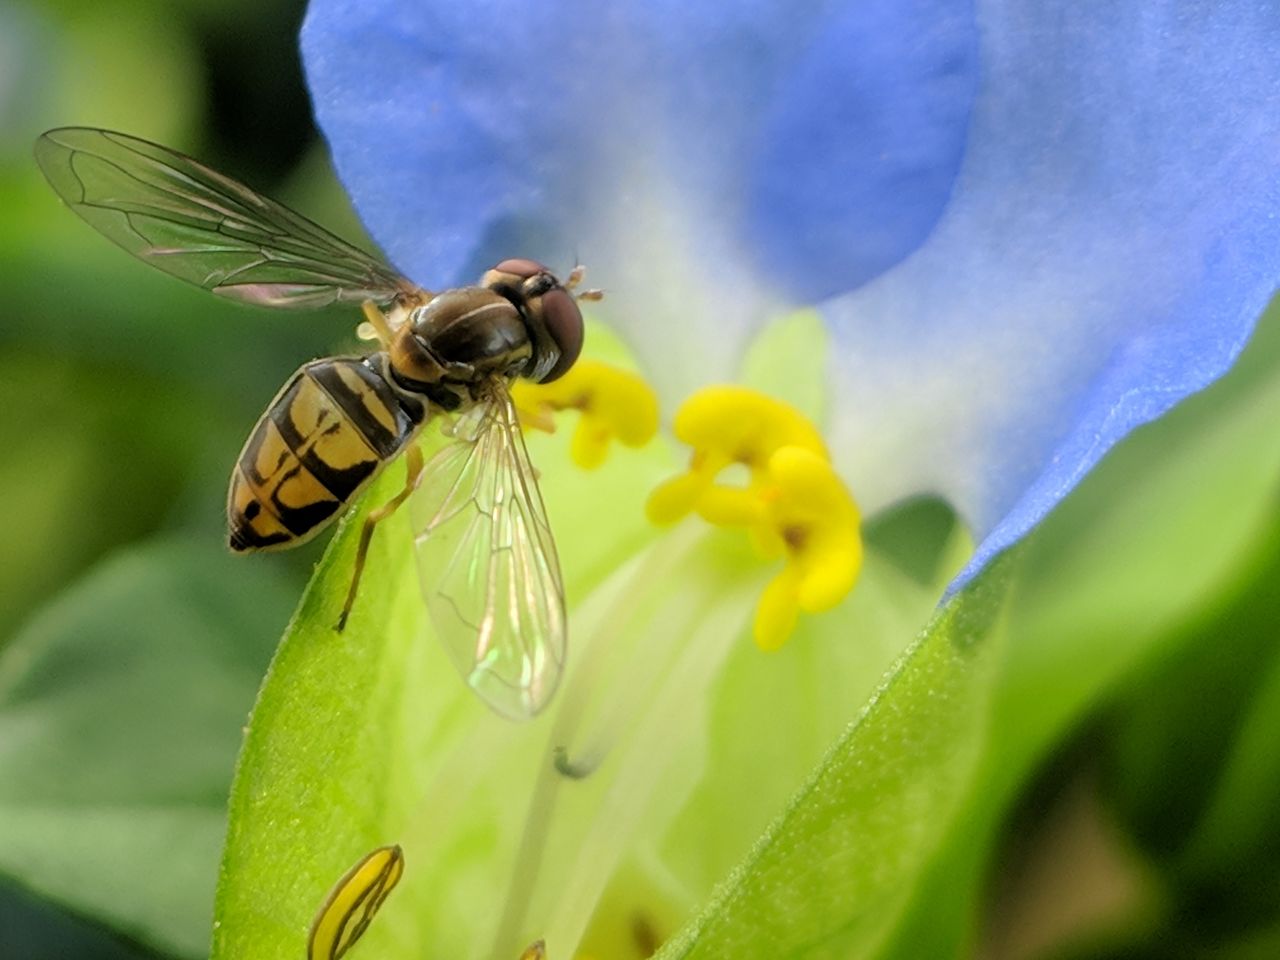 CLOSE-UP OF INSECT ON YELLOW FLOWER